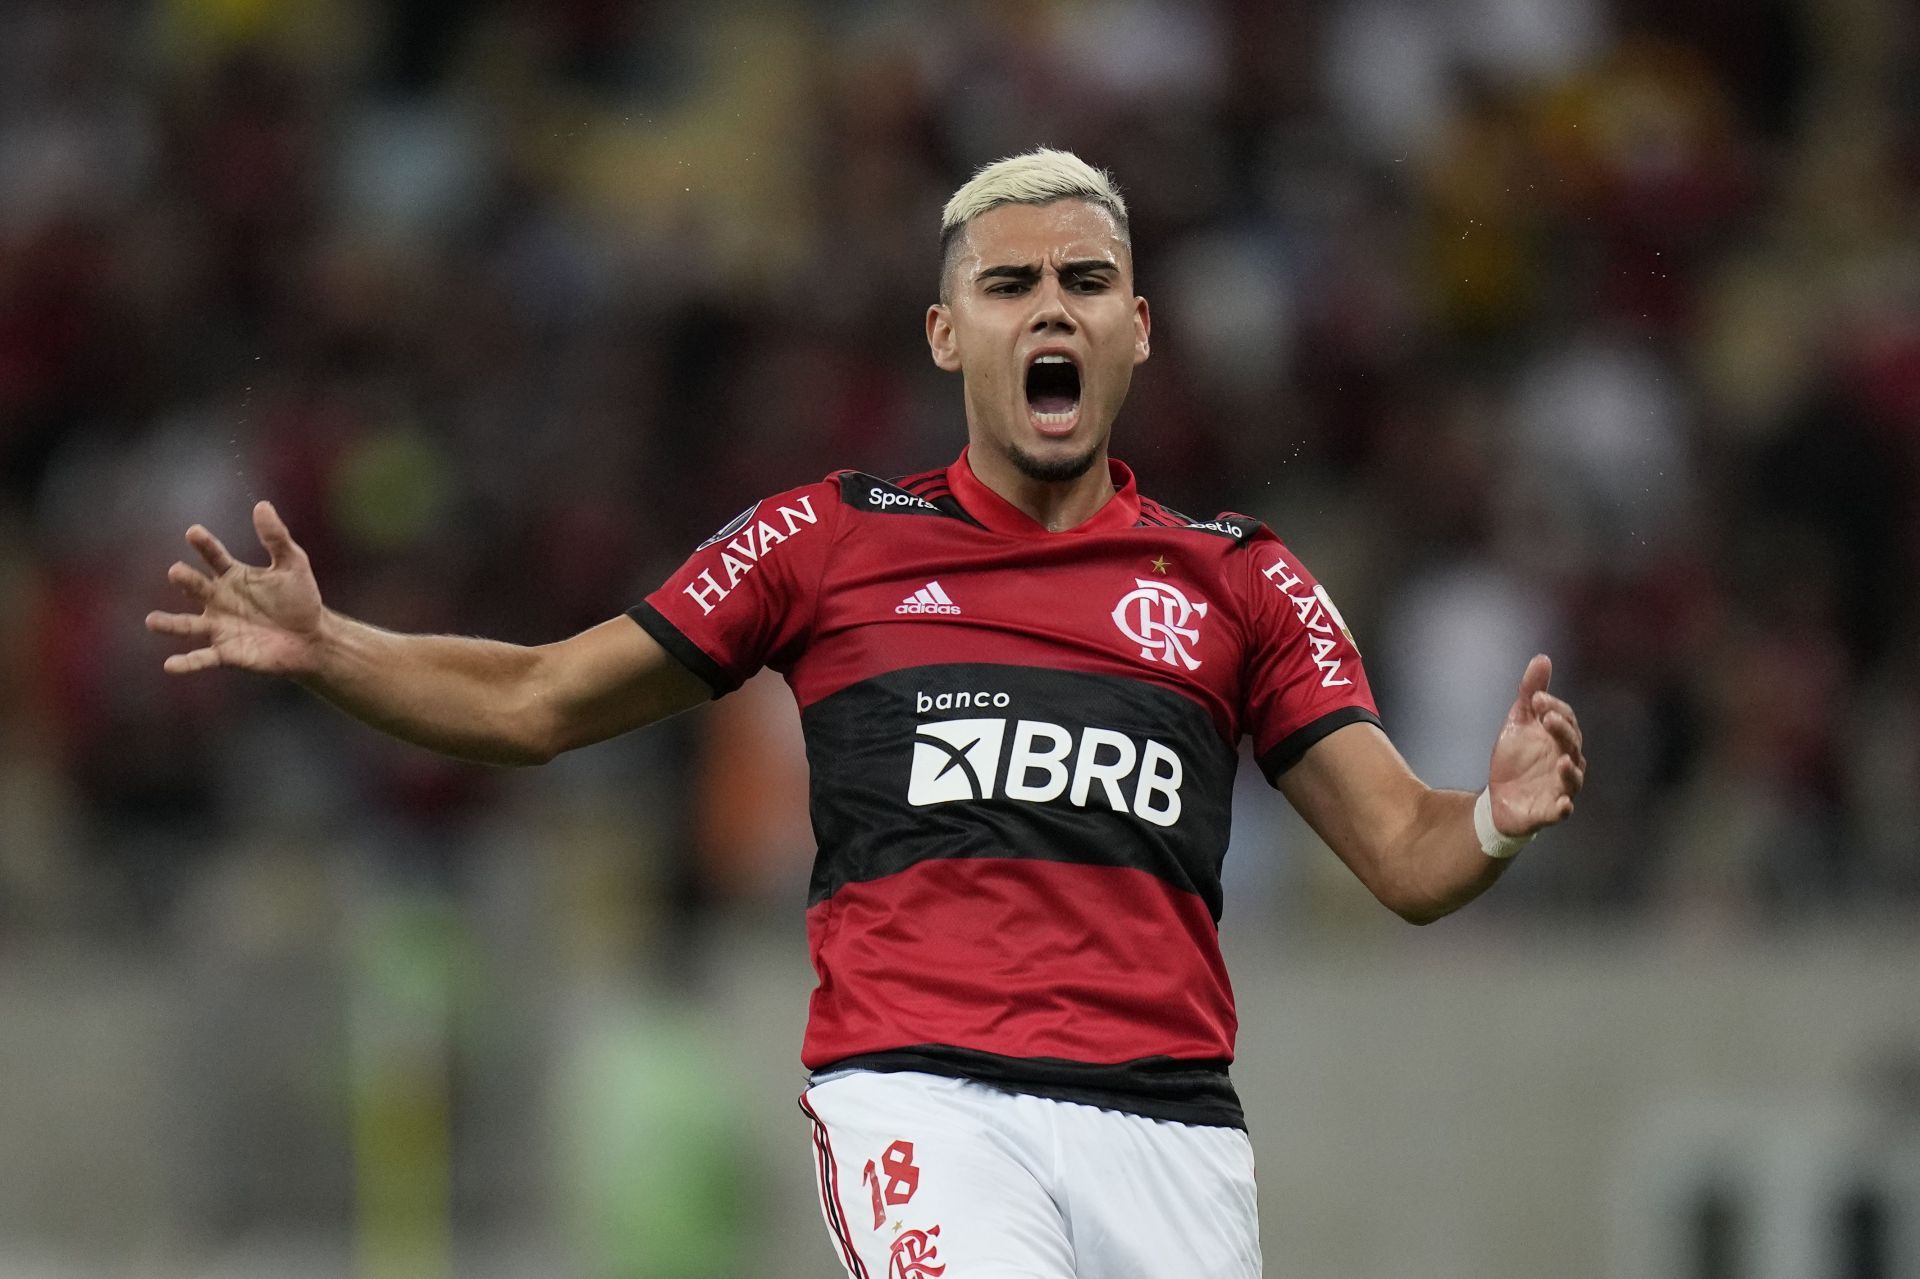 This loan spell in Brazil can help Pereira bring his career back on track